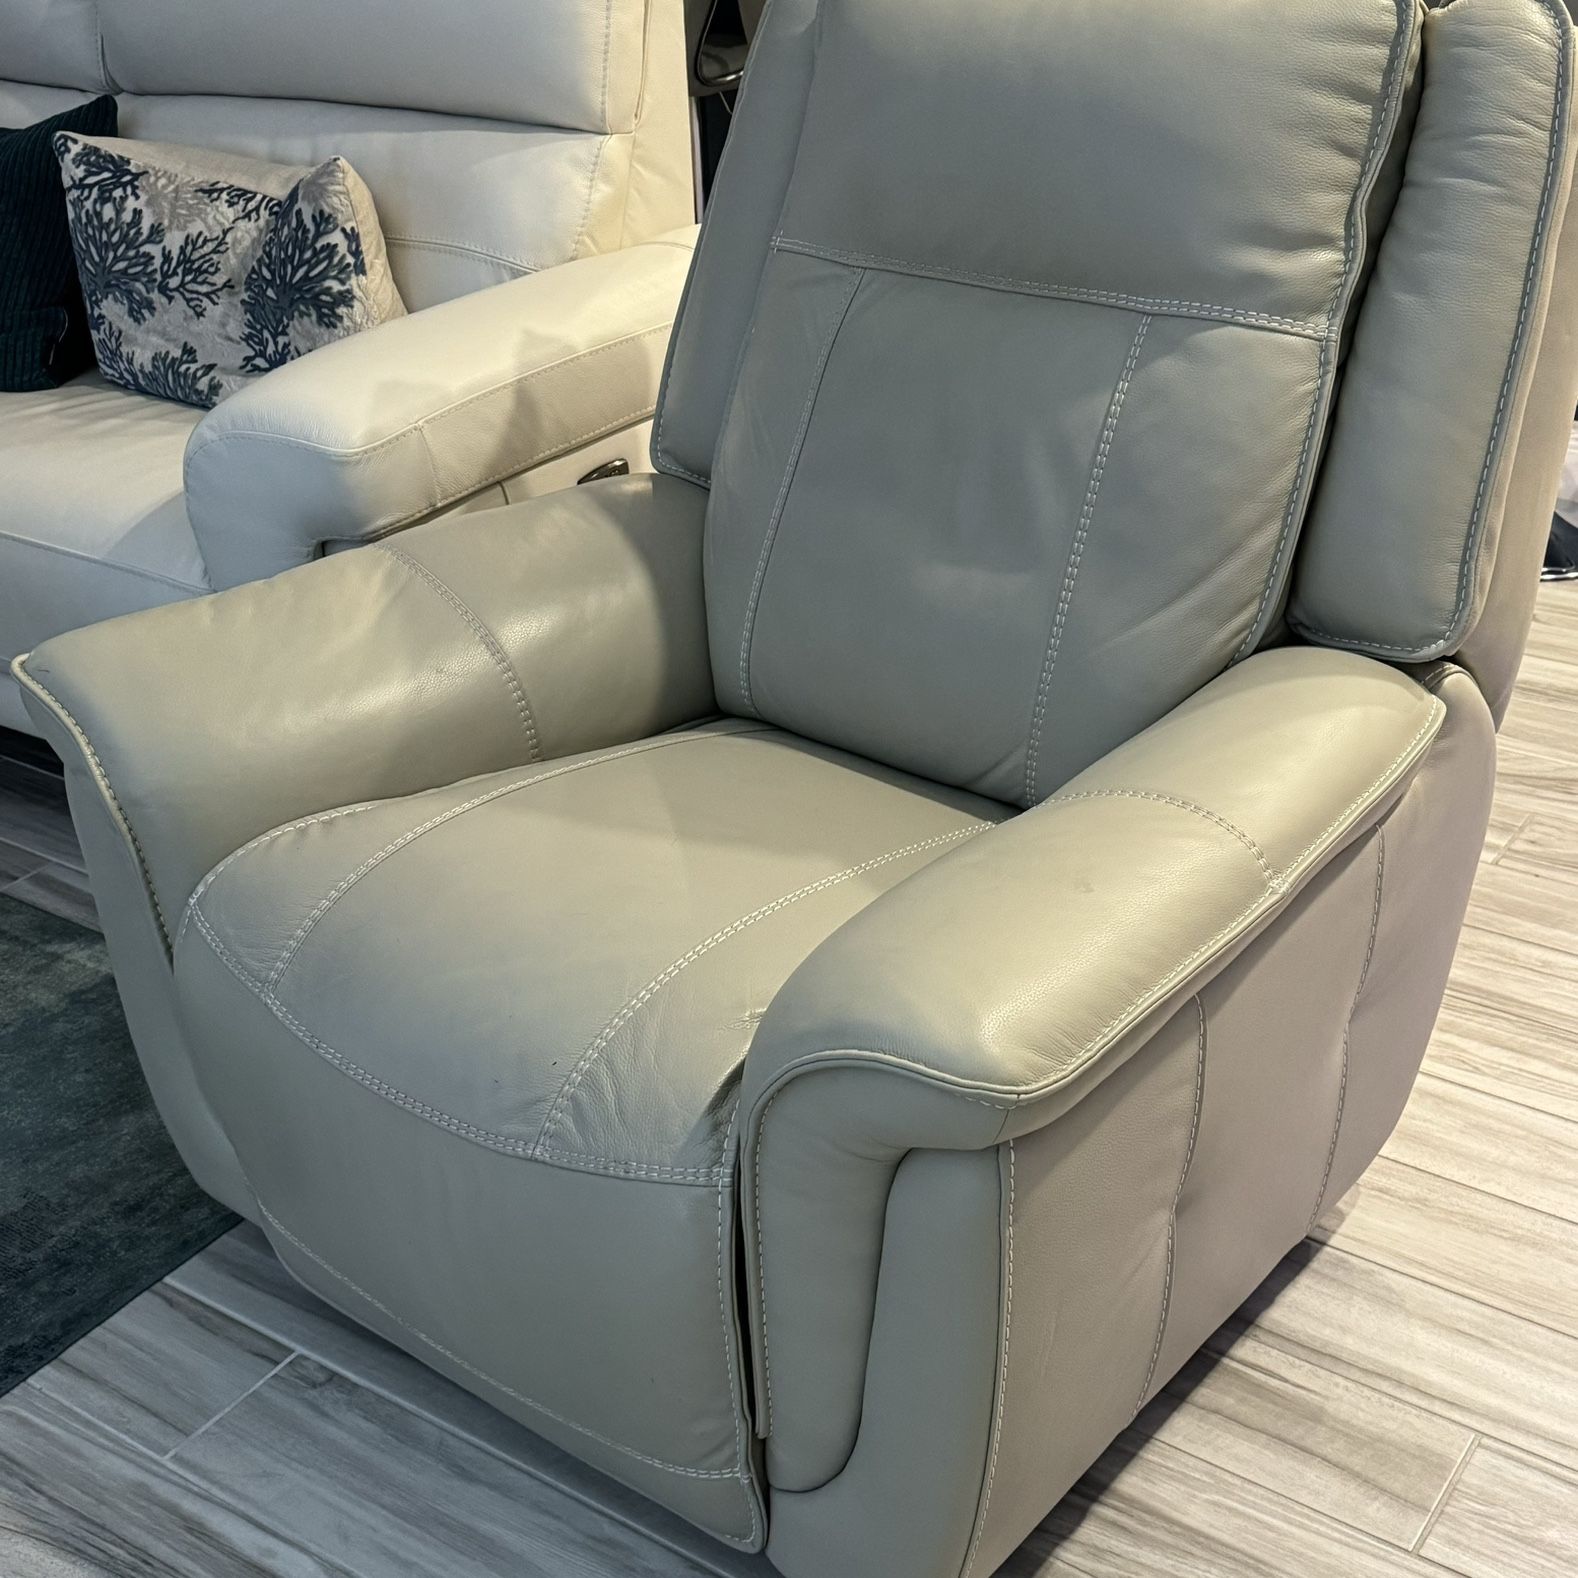 Gently Used Leather Rocker Recliner In Mint Condition 